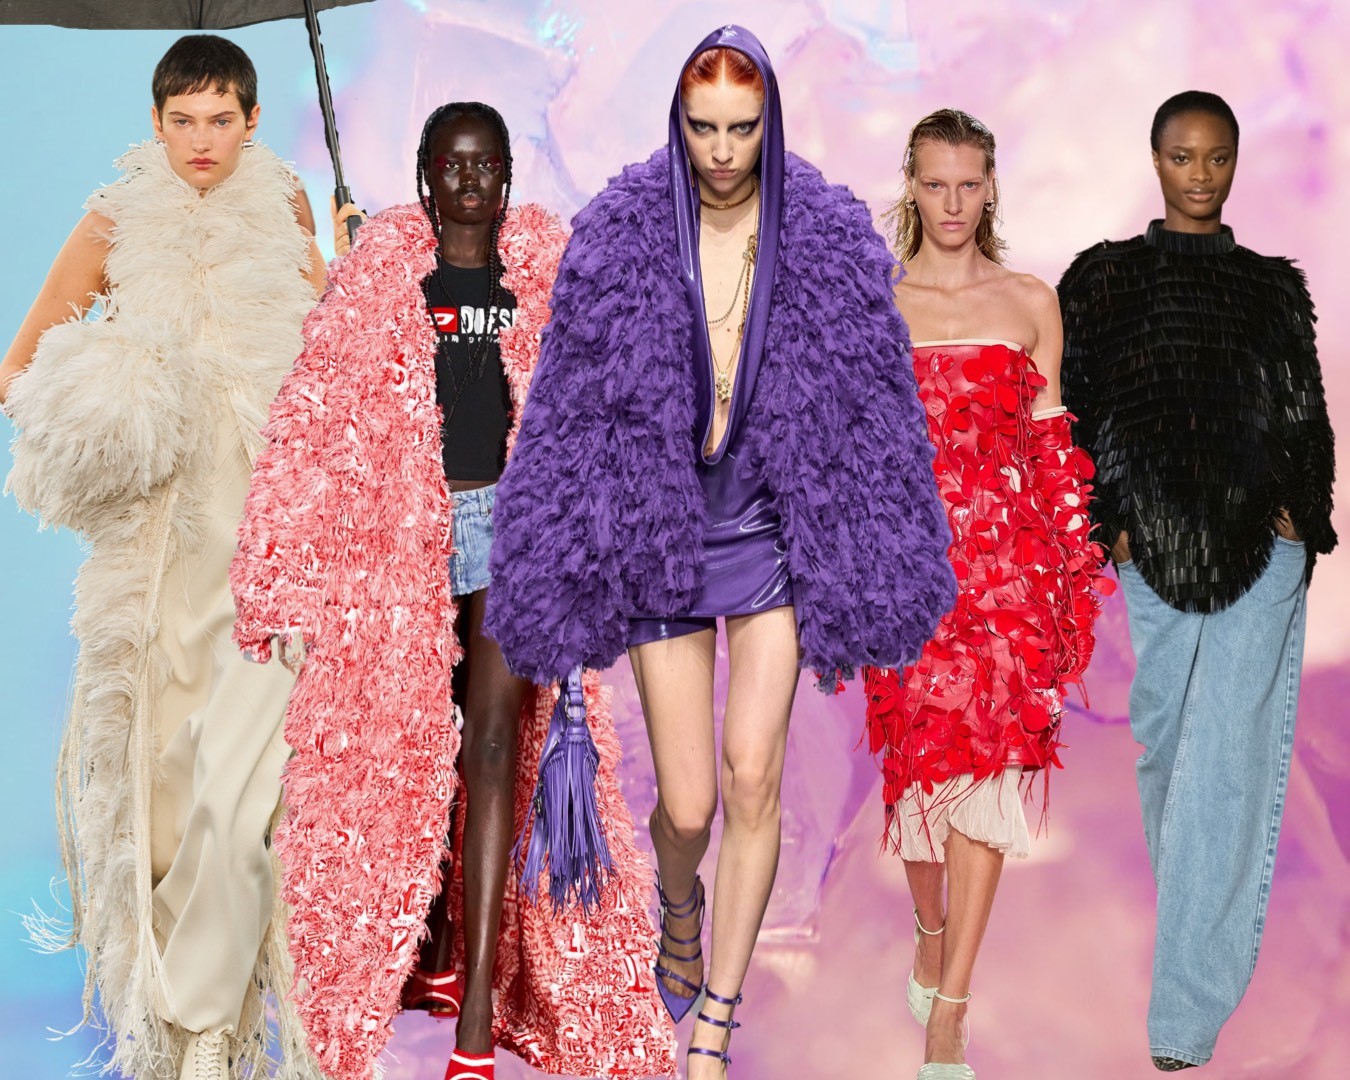 Five models walking in London Fashion Week wearing different feathered clothing in different colors such as tan, off white, pink, purple, red and black.